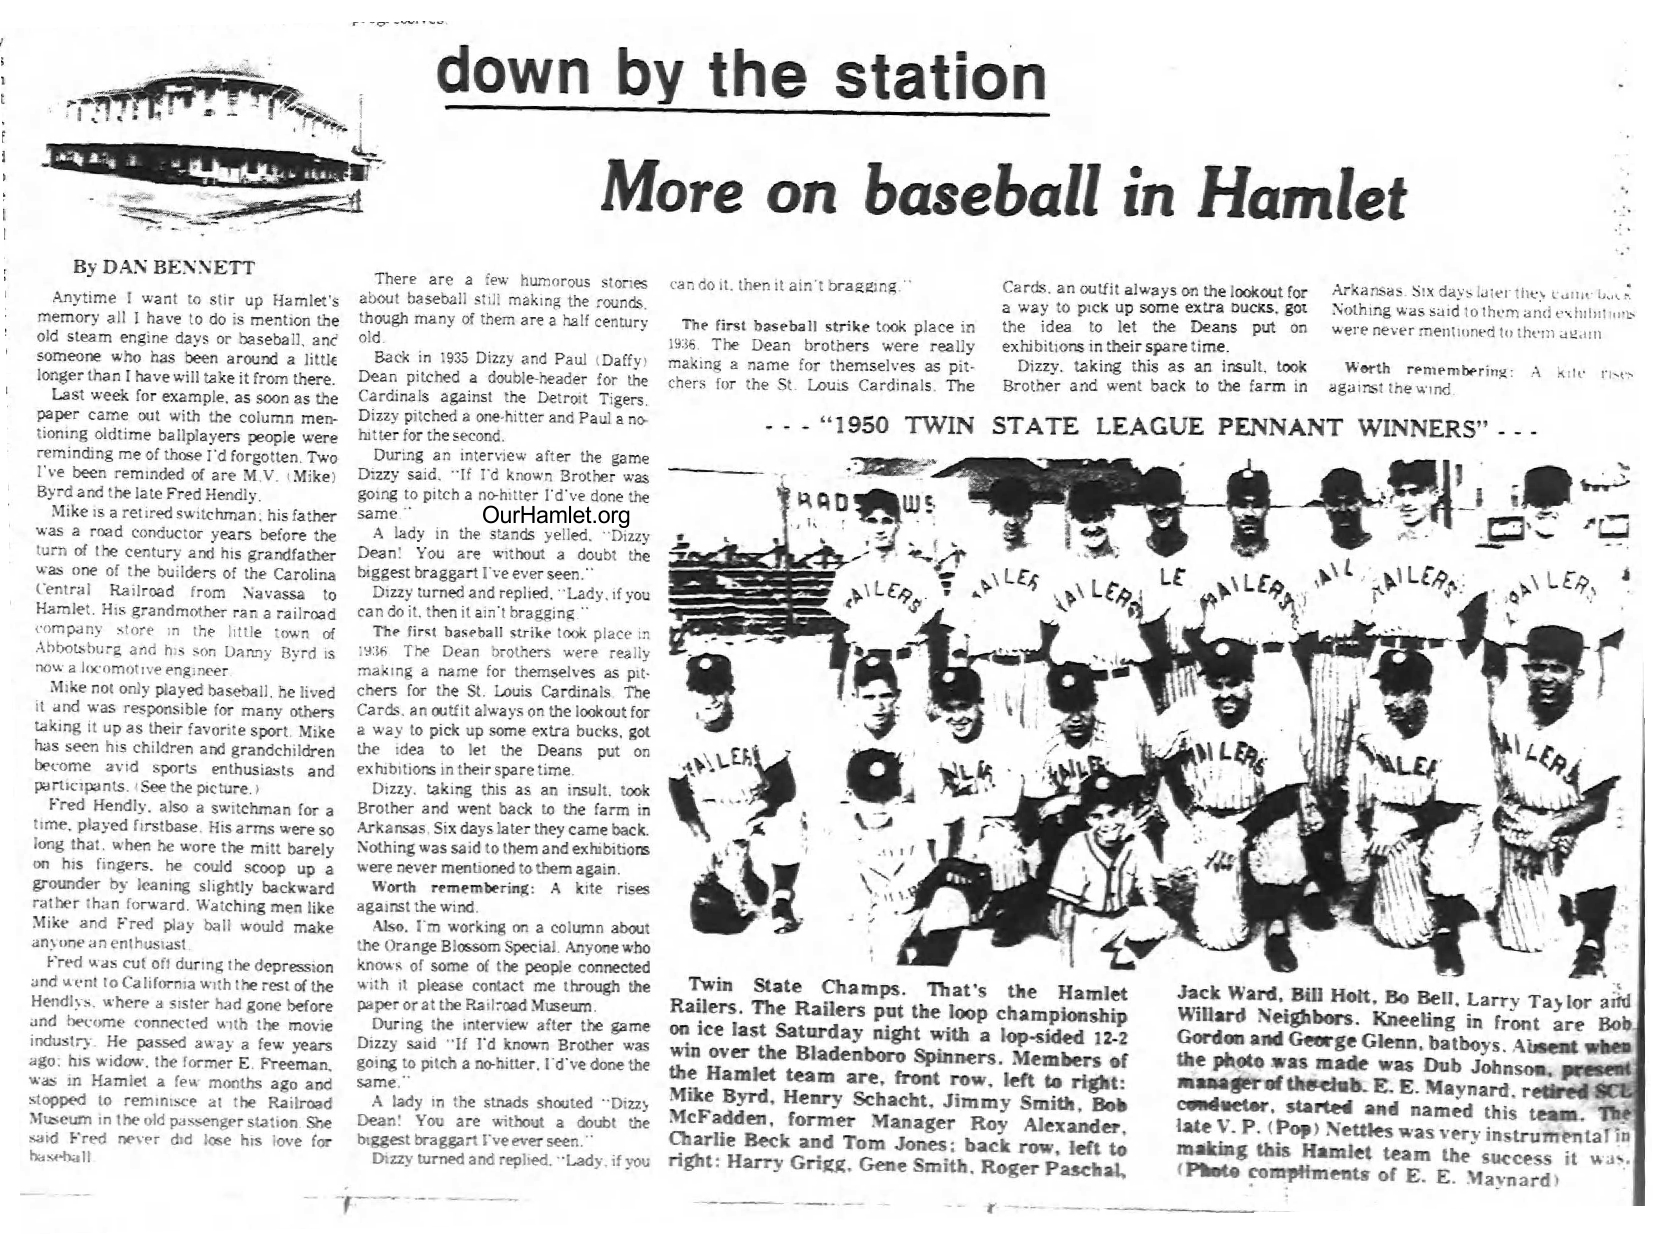 Down by the Station - More on Baseball in Hamlet OH.jpg